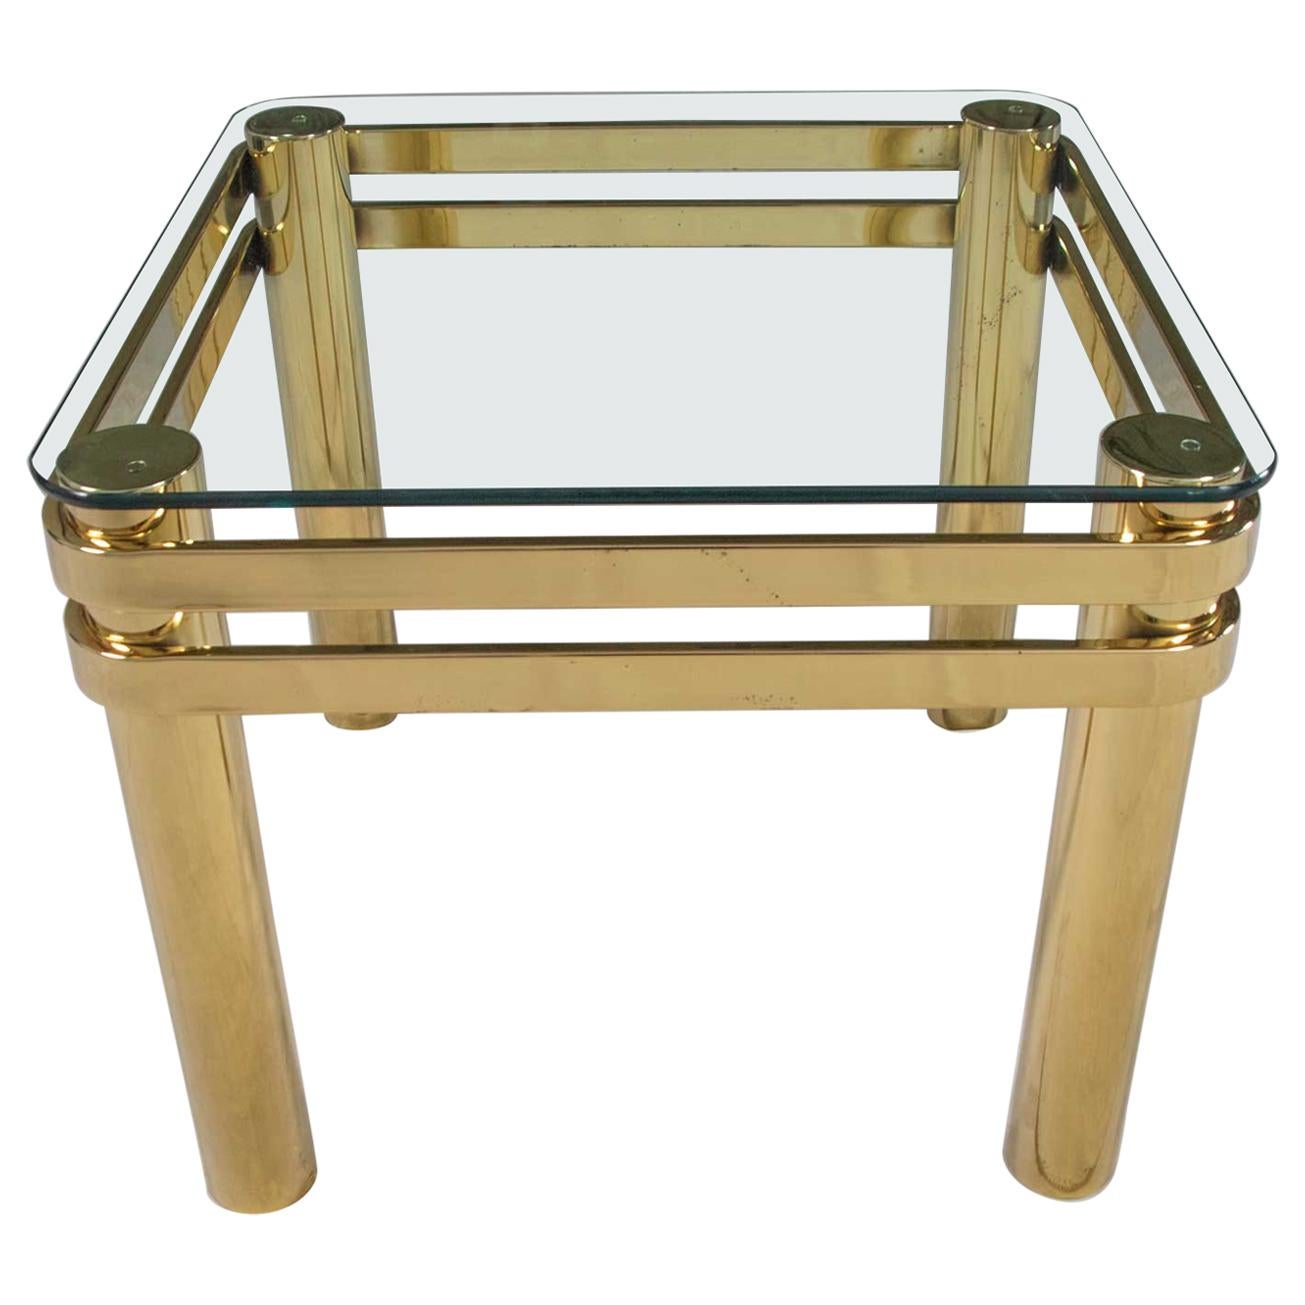 Vintage Modern Brass & Glass Side End Table with Glass Top Style Pace or Springe